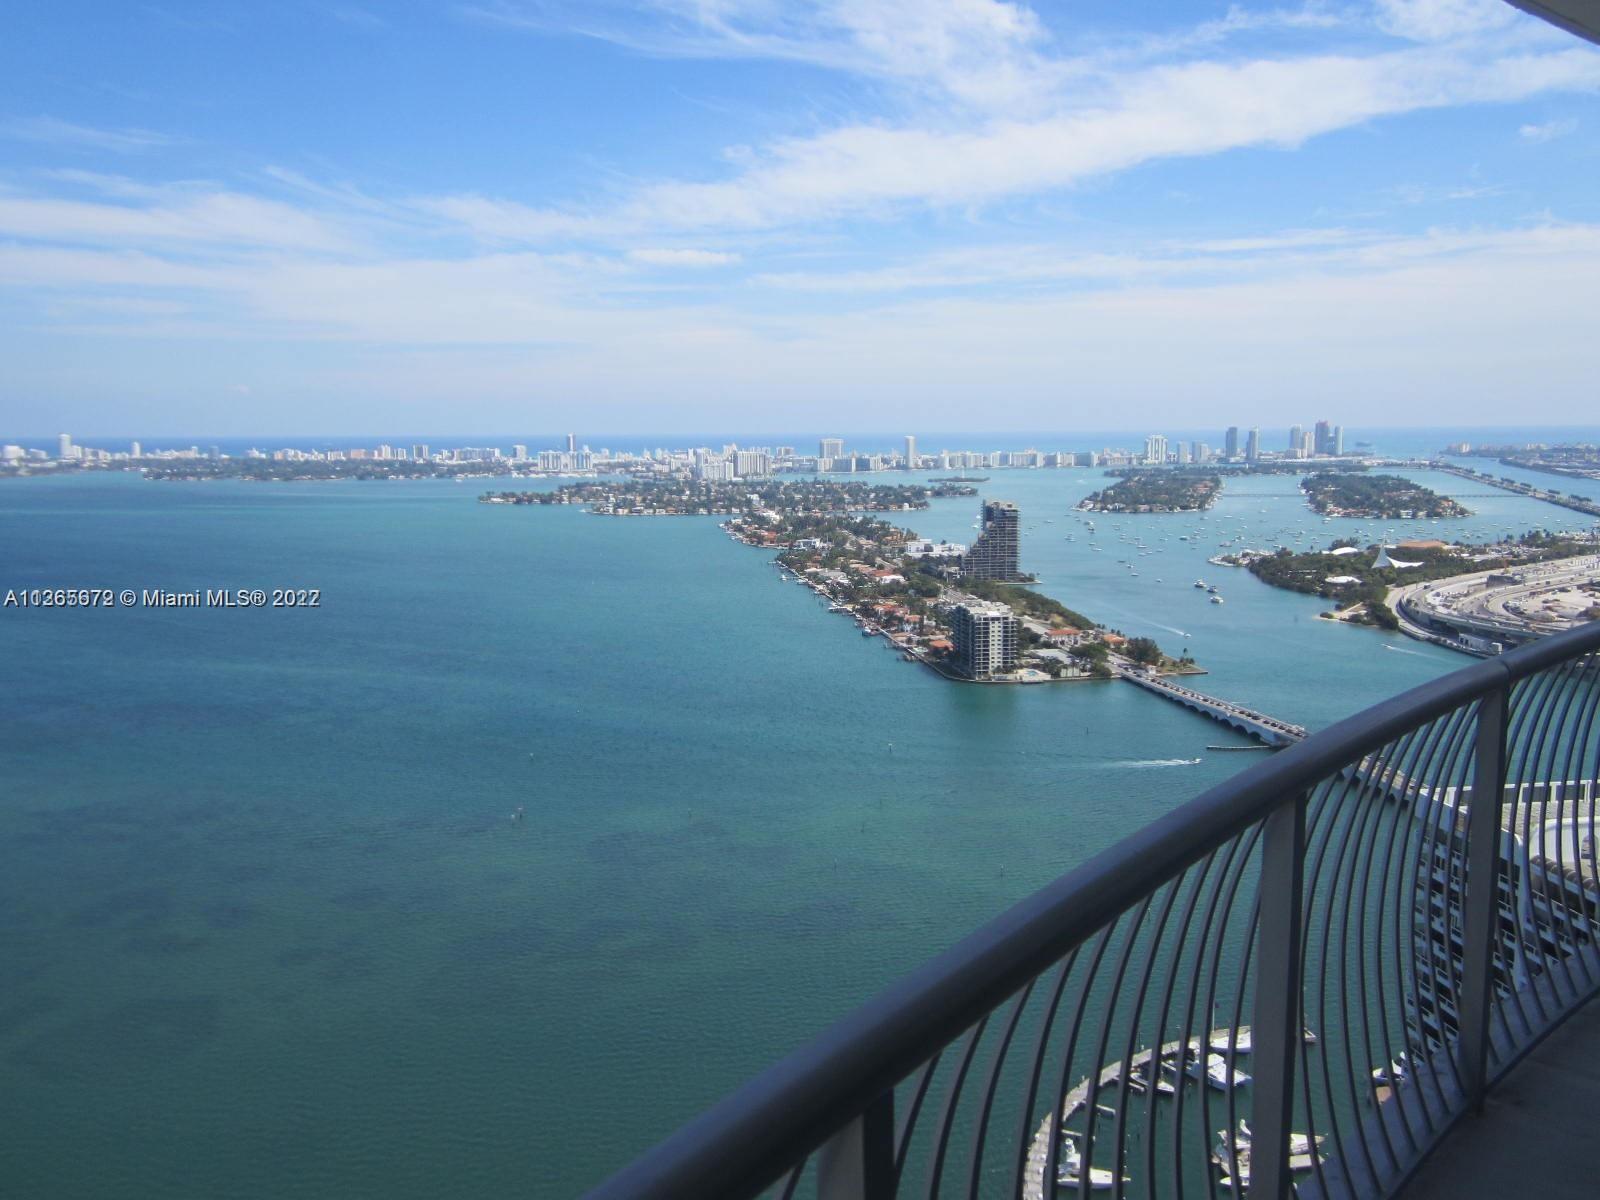 Spectacular 2/2 unit with unobstructed Bay, Ocean, and Downtown skyline views!
Enjoy a full-length 